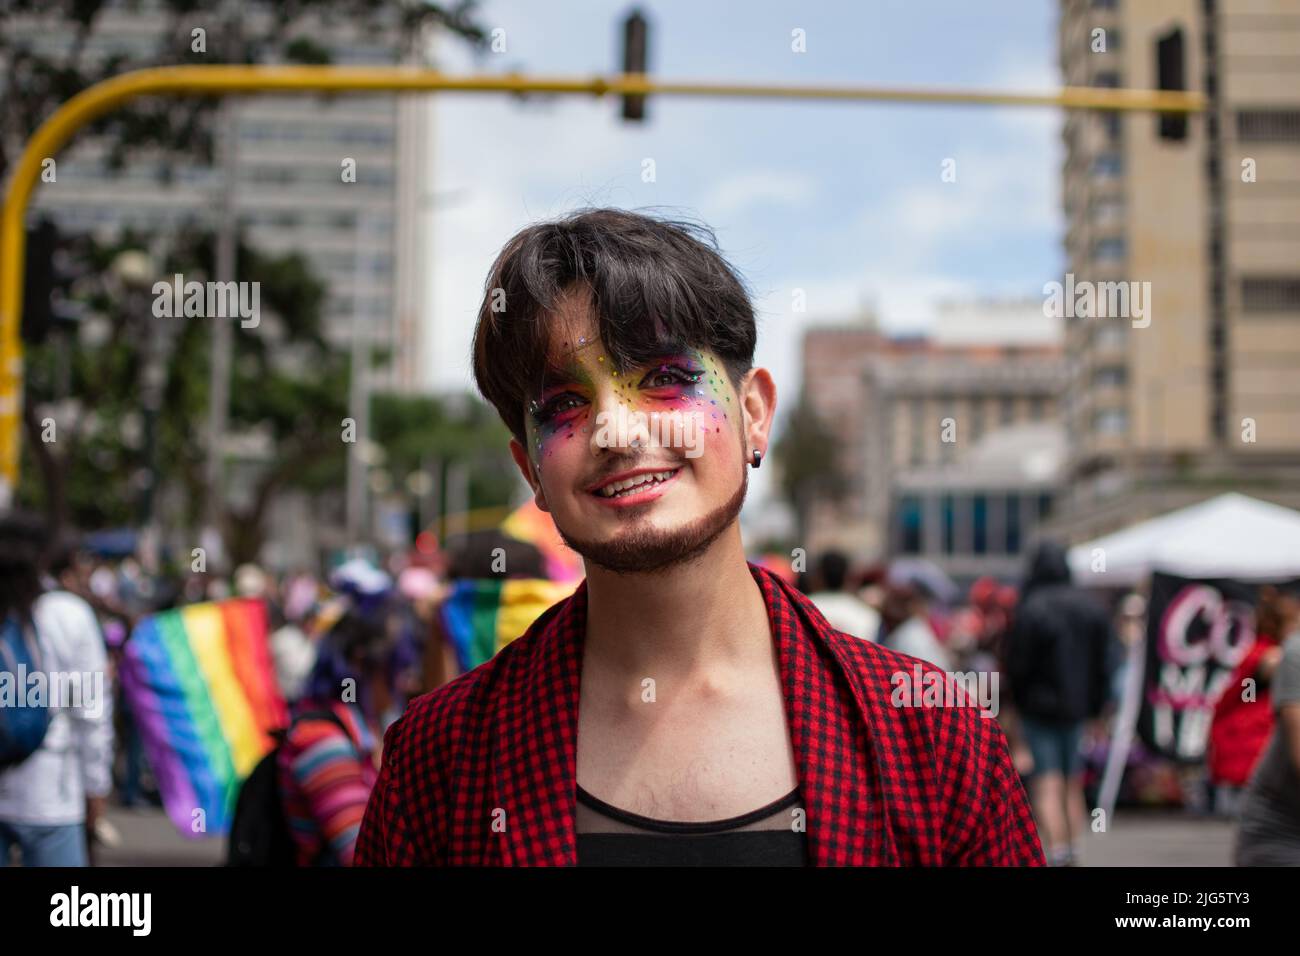 Man with lgtbiq+ flag painted on his face smiles as he attends pride celebration in Bogota. Stock Photo